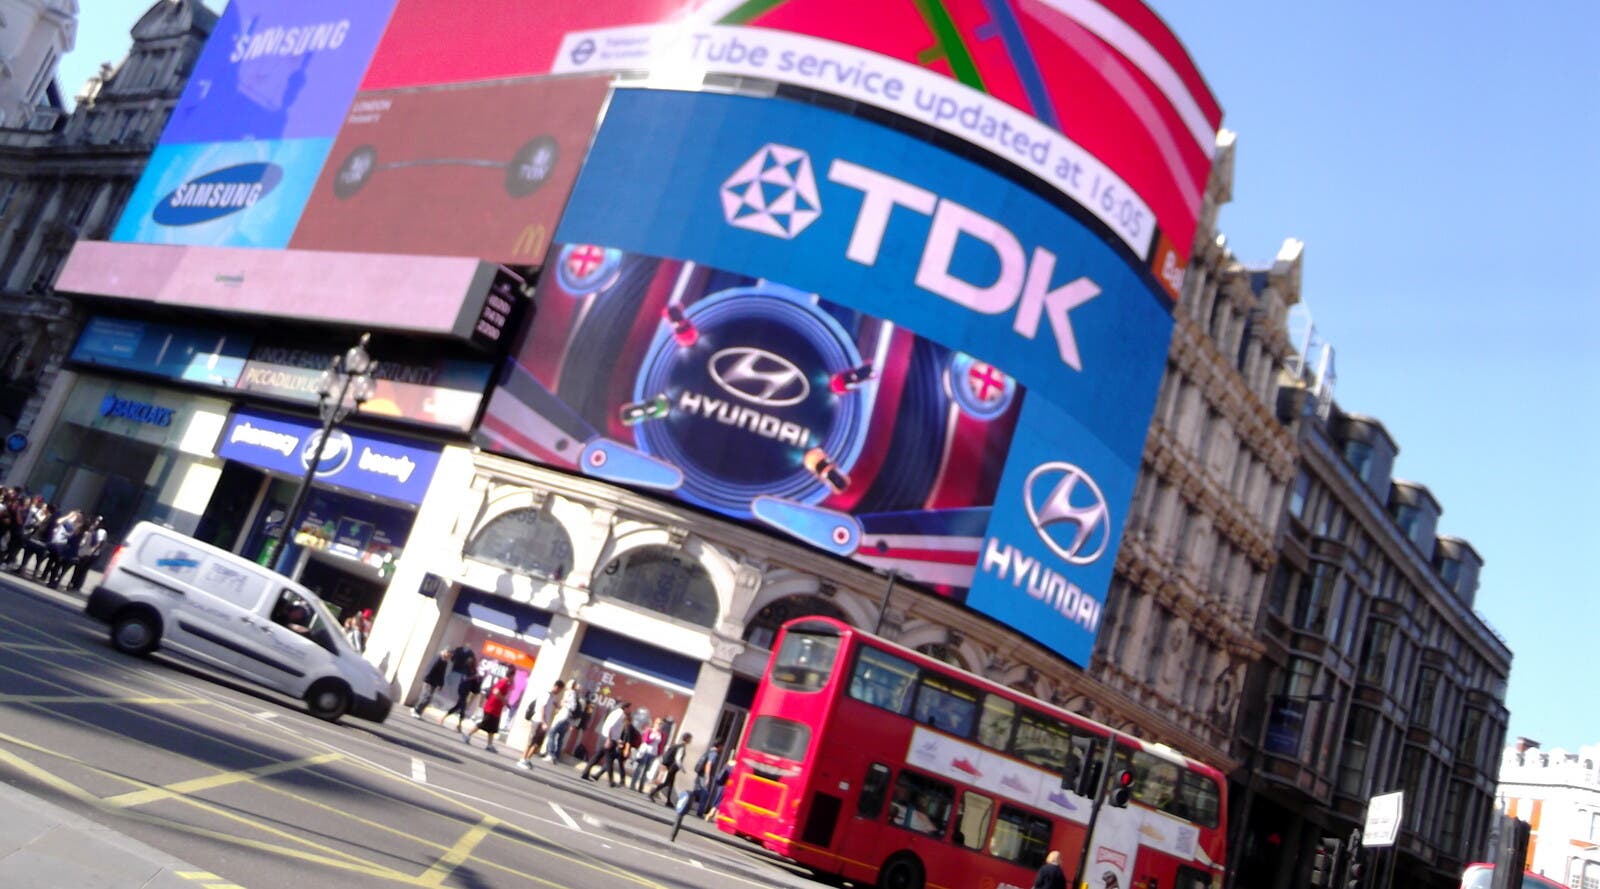 Piccadilly Circus and London's shopping district